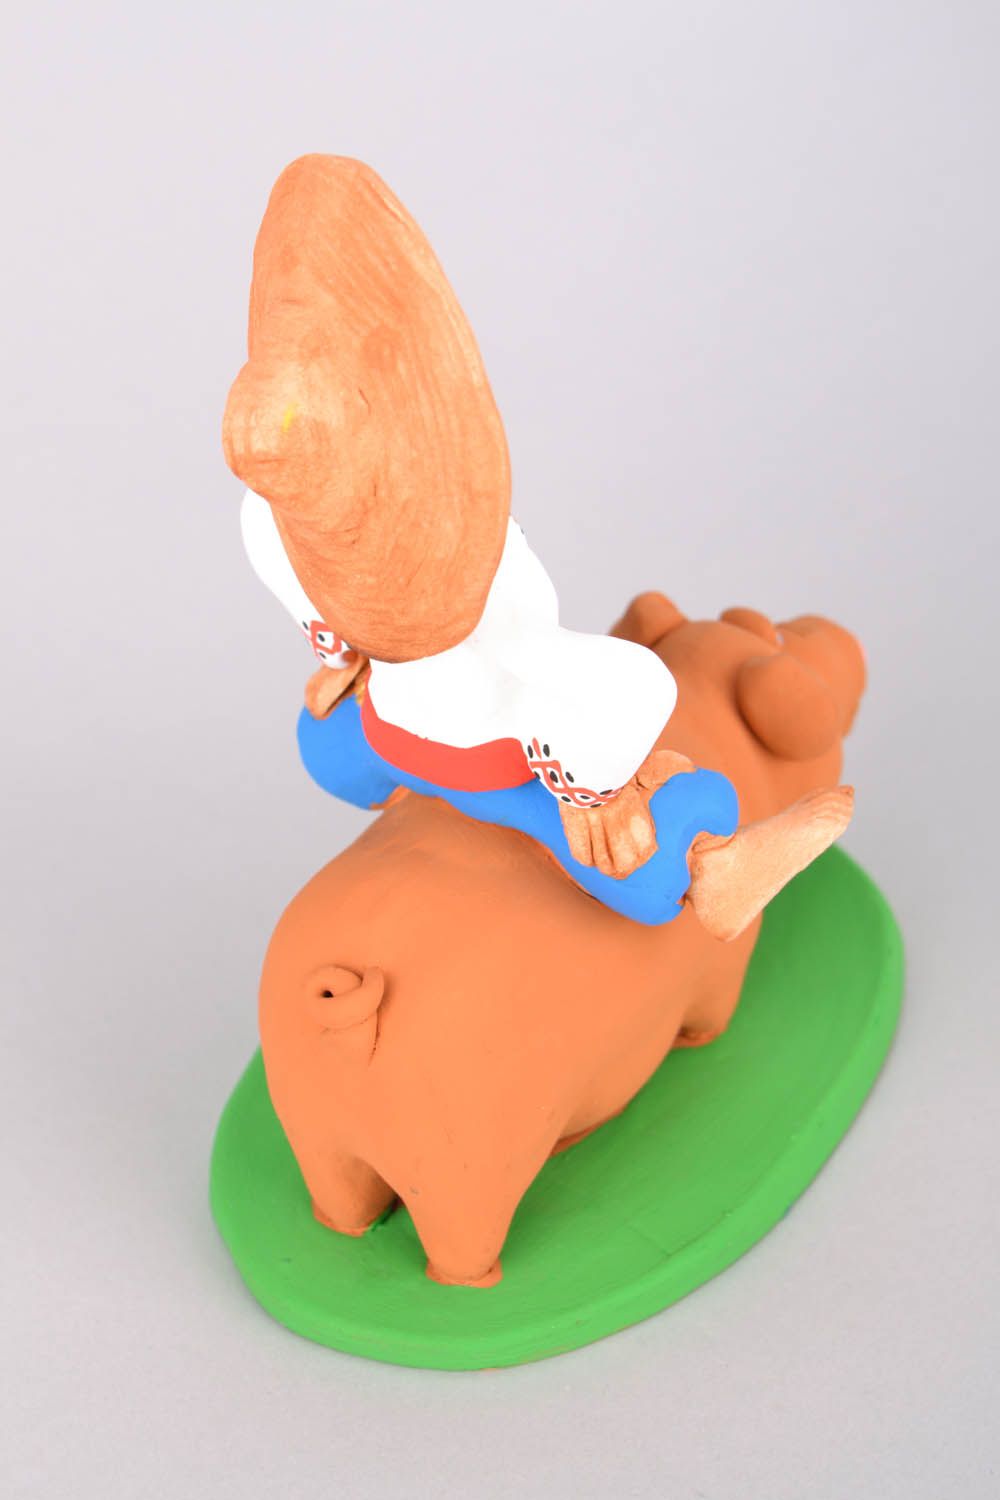 Homemade clay statuette Cossack Riding a Pig photo 5